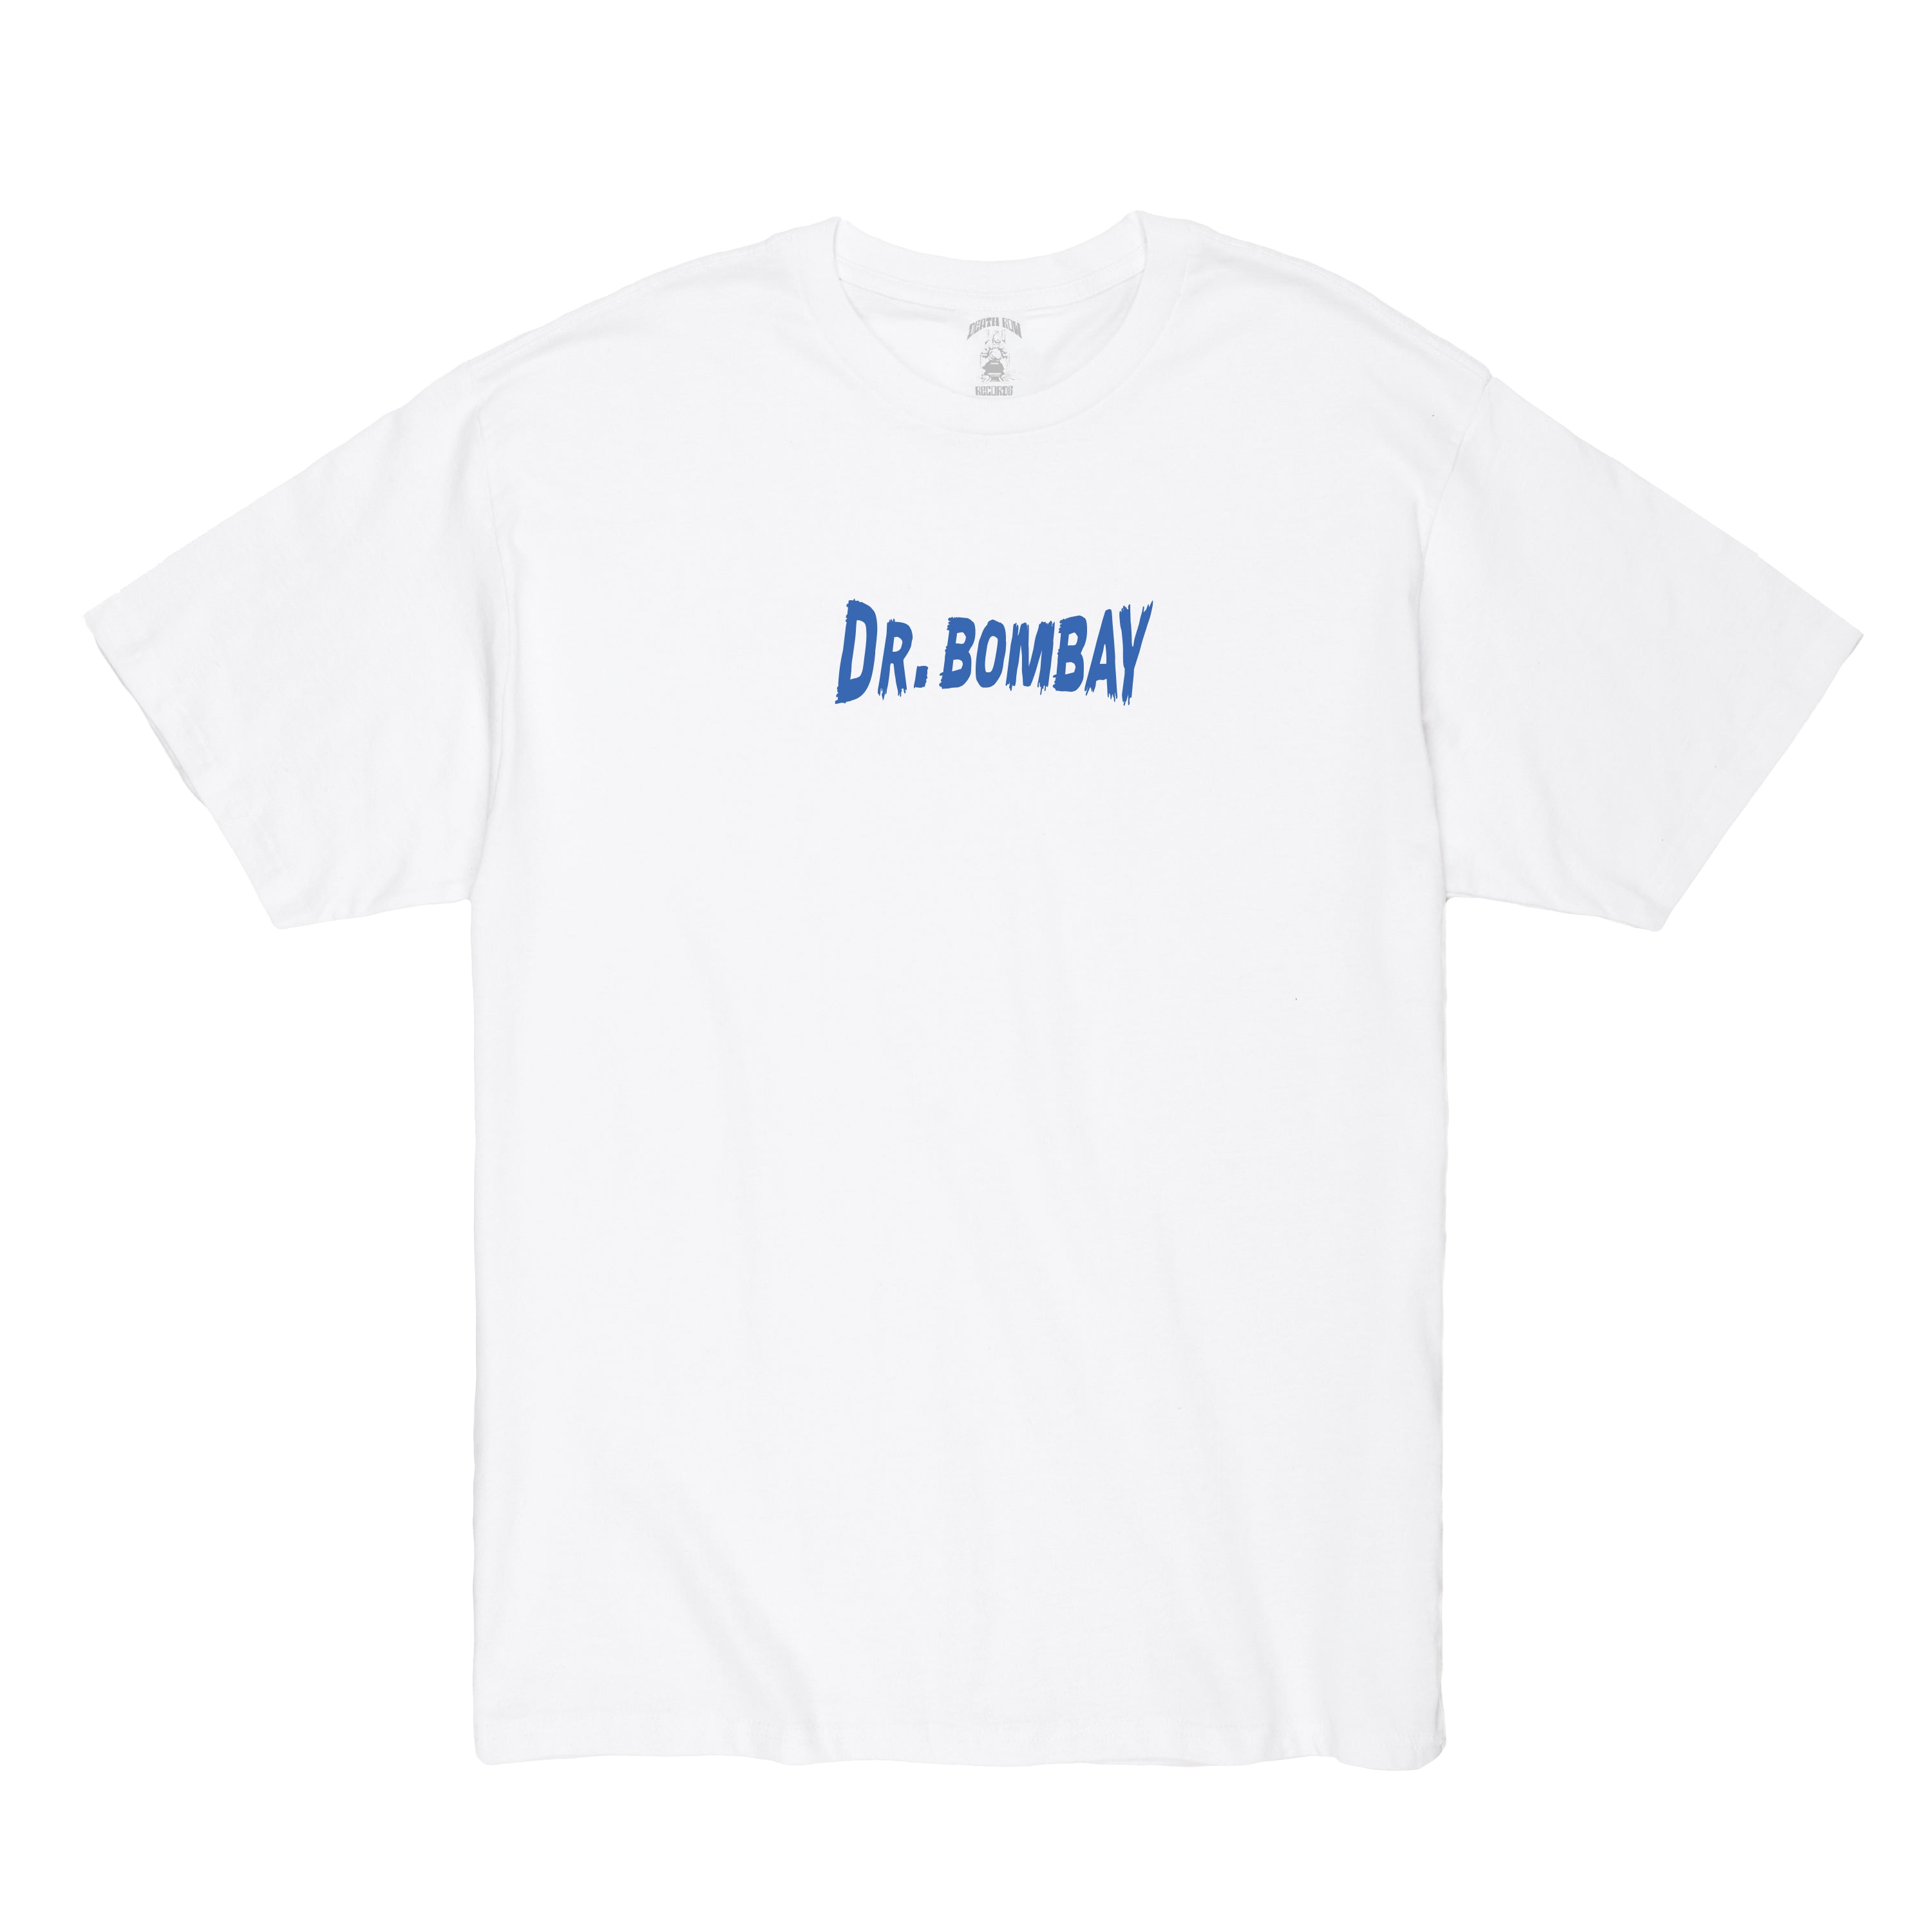 Dr Bombay Silhouette Square Teams Tee